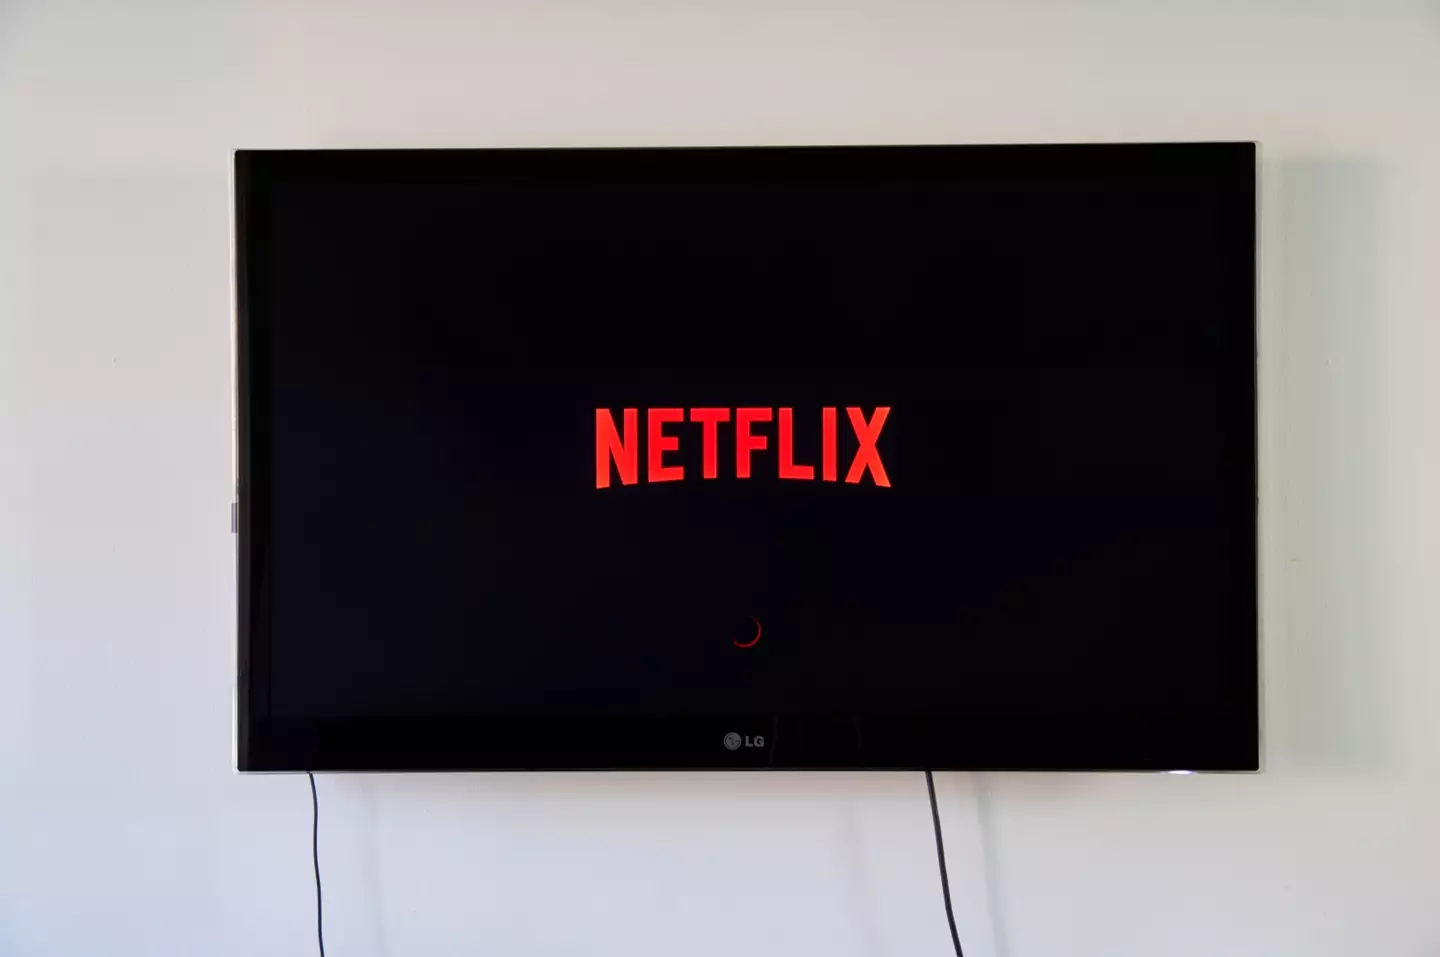 Netflix is bringing in adverts.